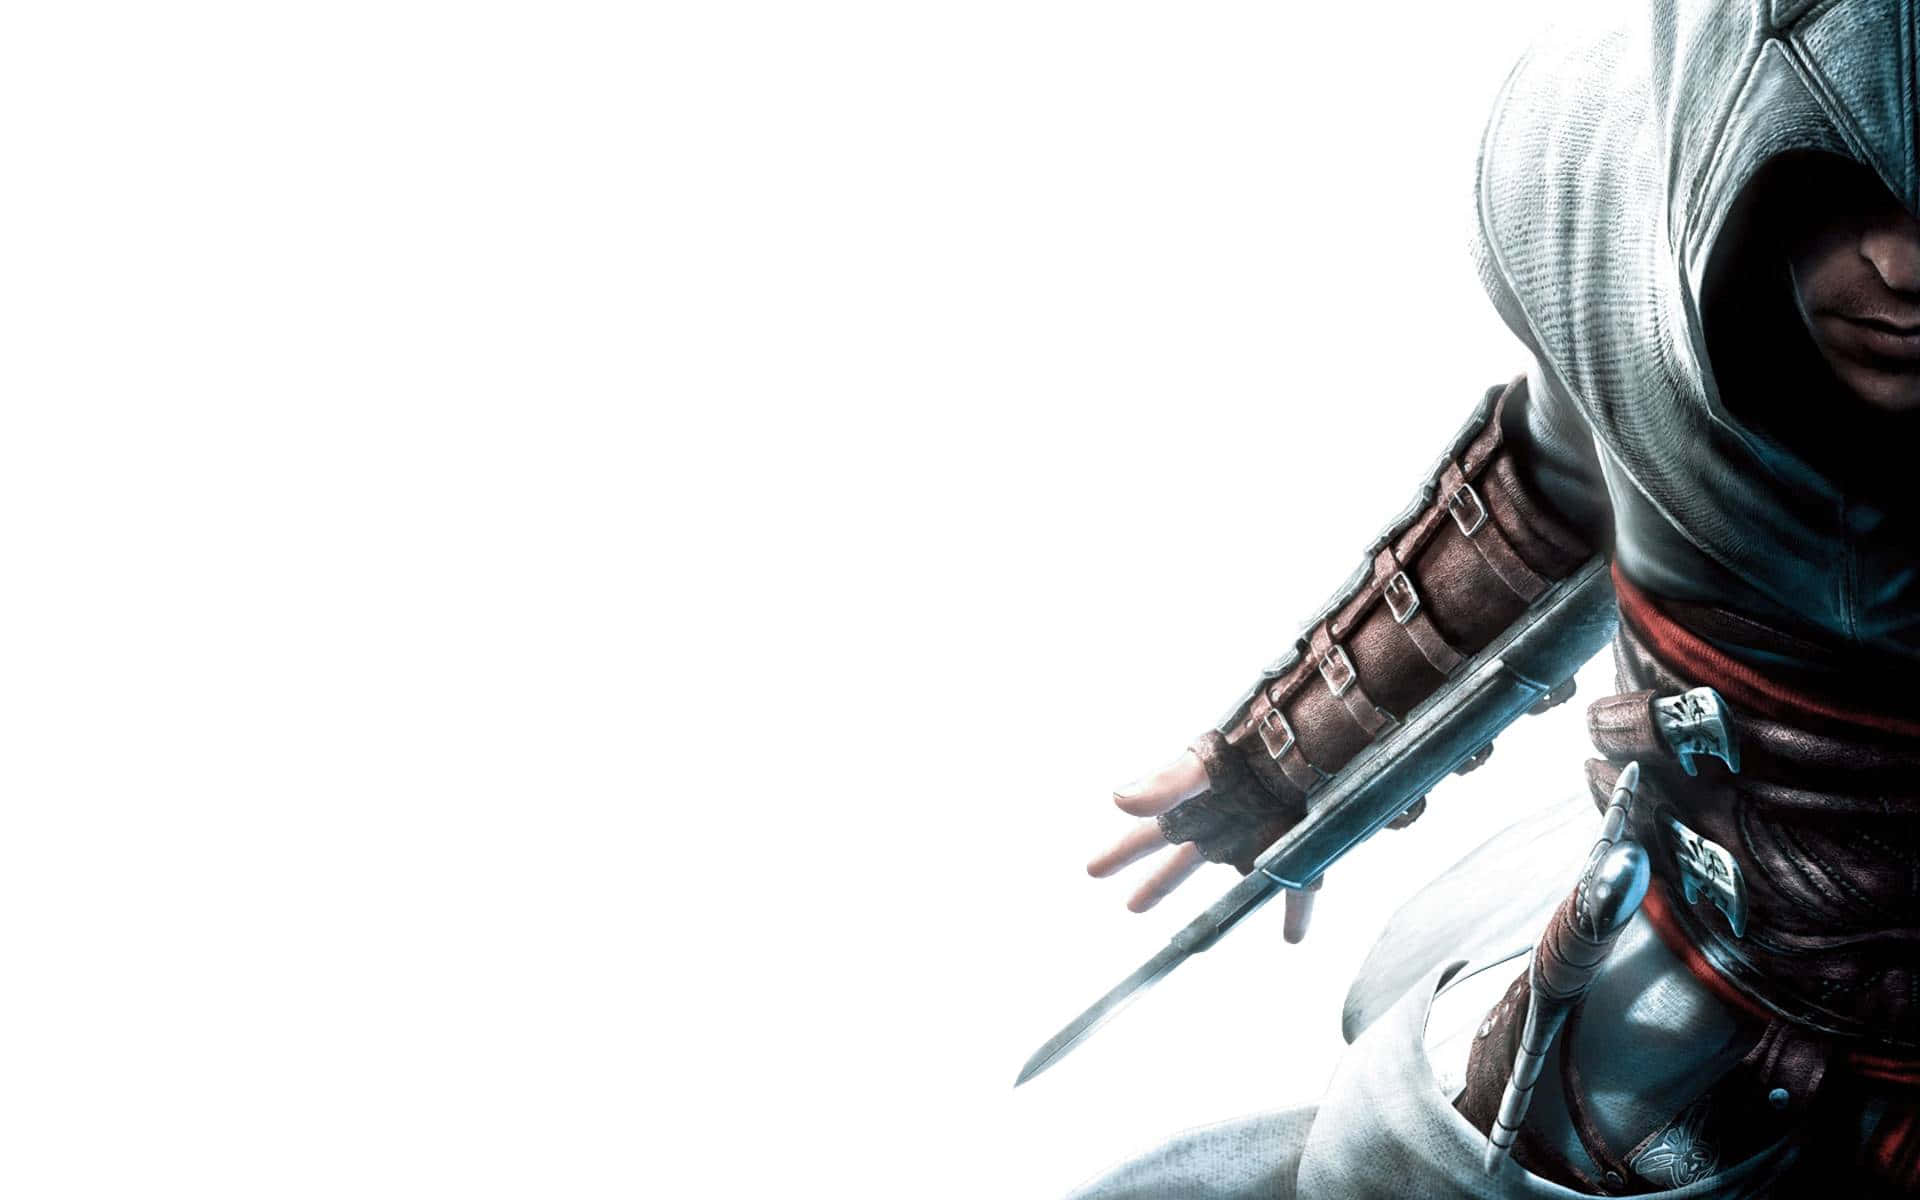 #Assassins Creed Characters in Action Wallpaper